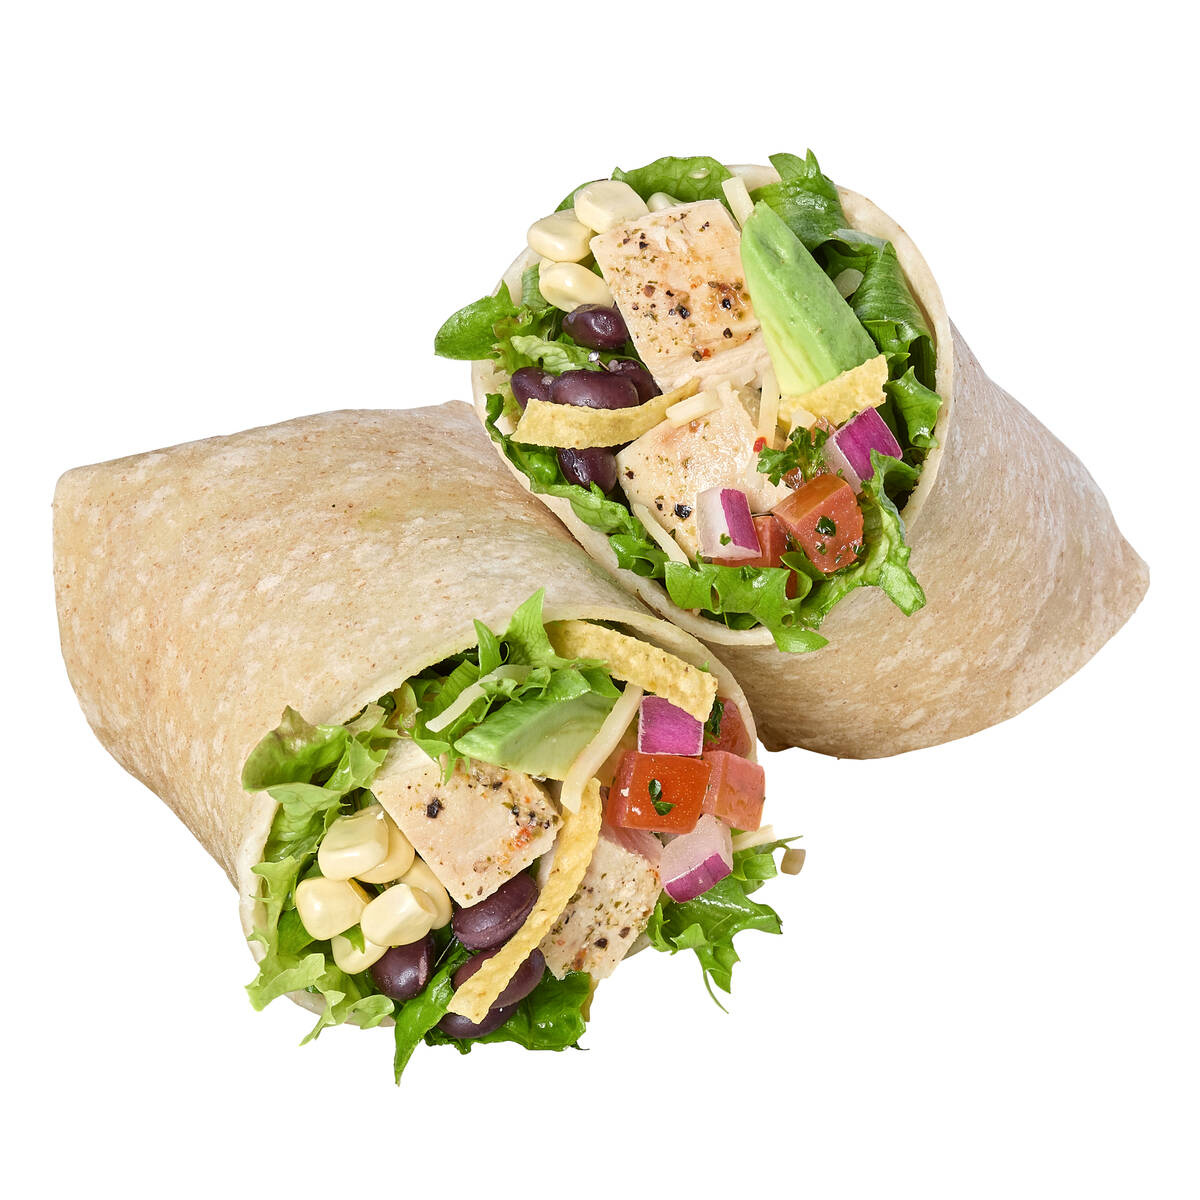 A barbecue ranch wrap from Salad and Go. (Salad and Go)